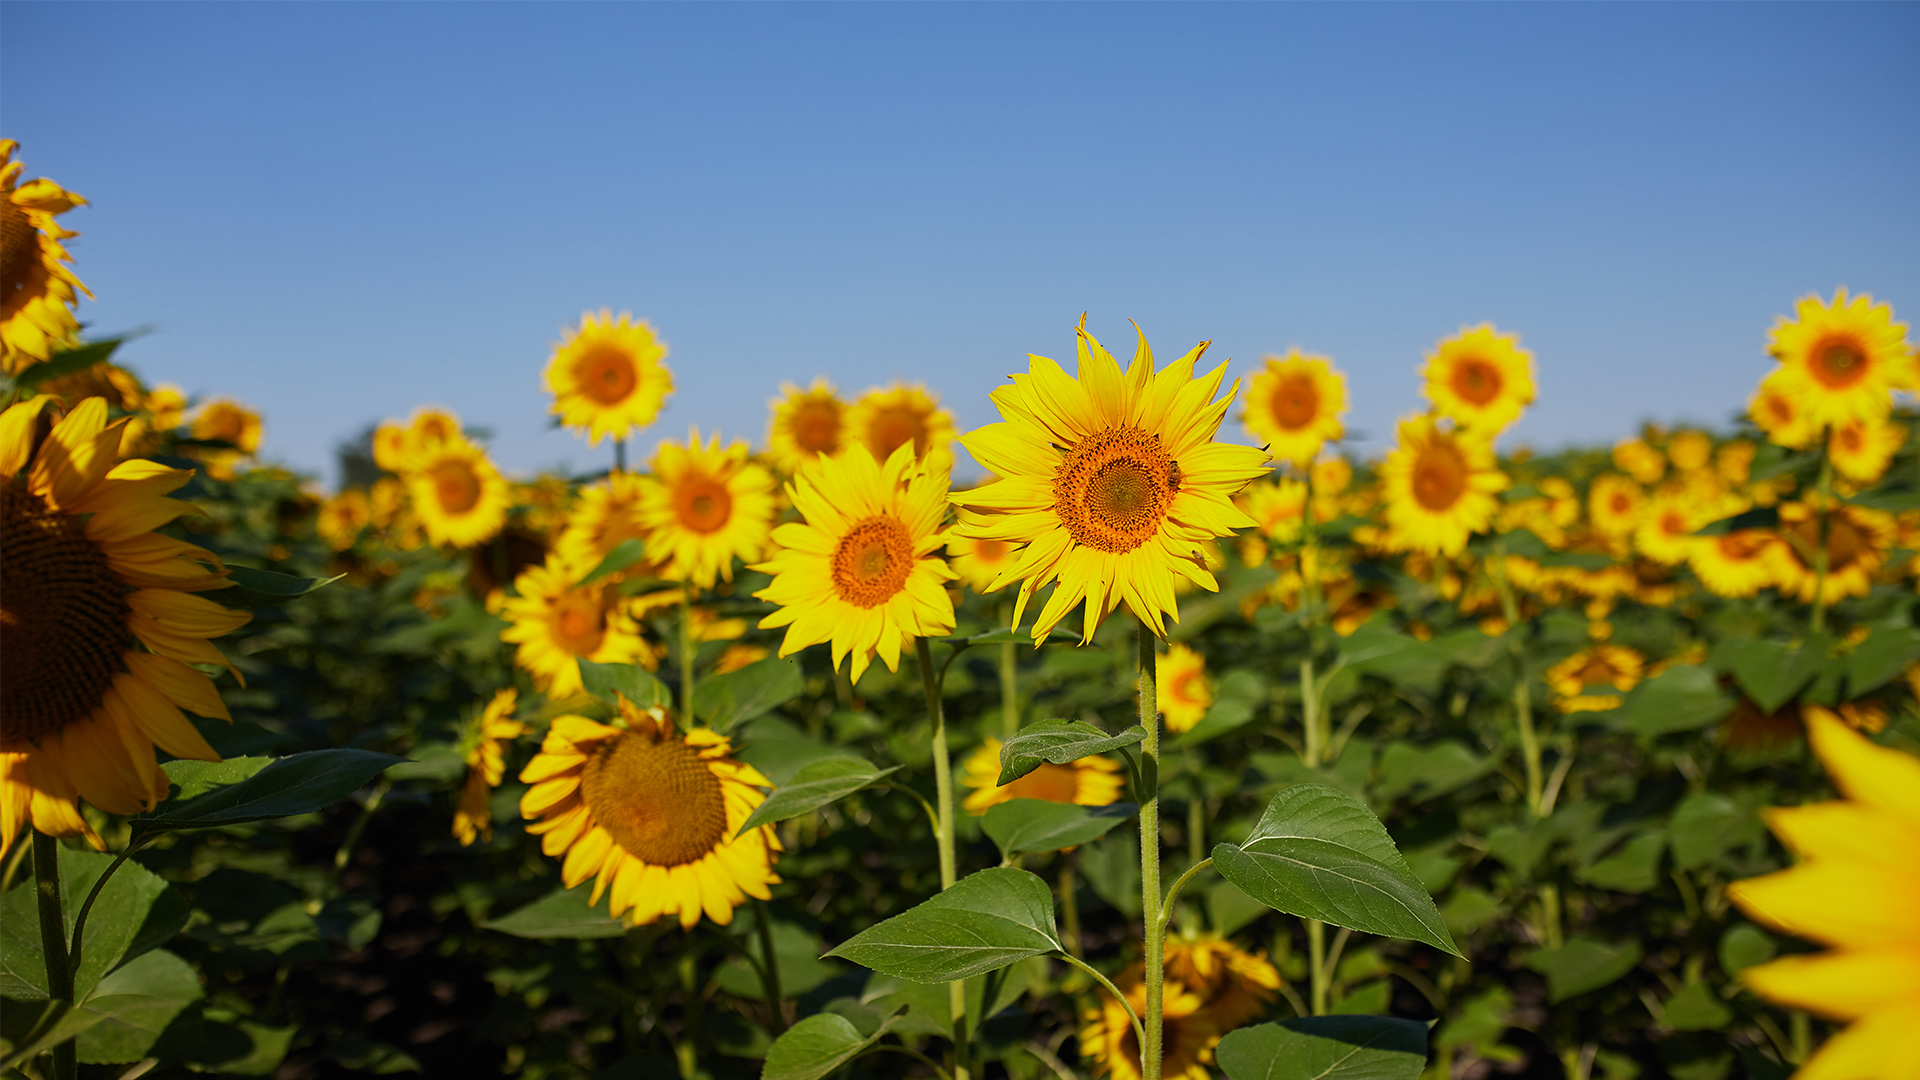 Sunflower export duty is expected to be introduced from 2023